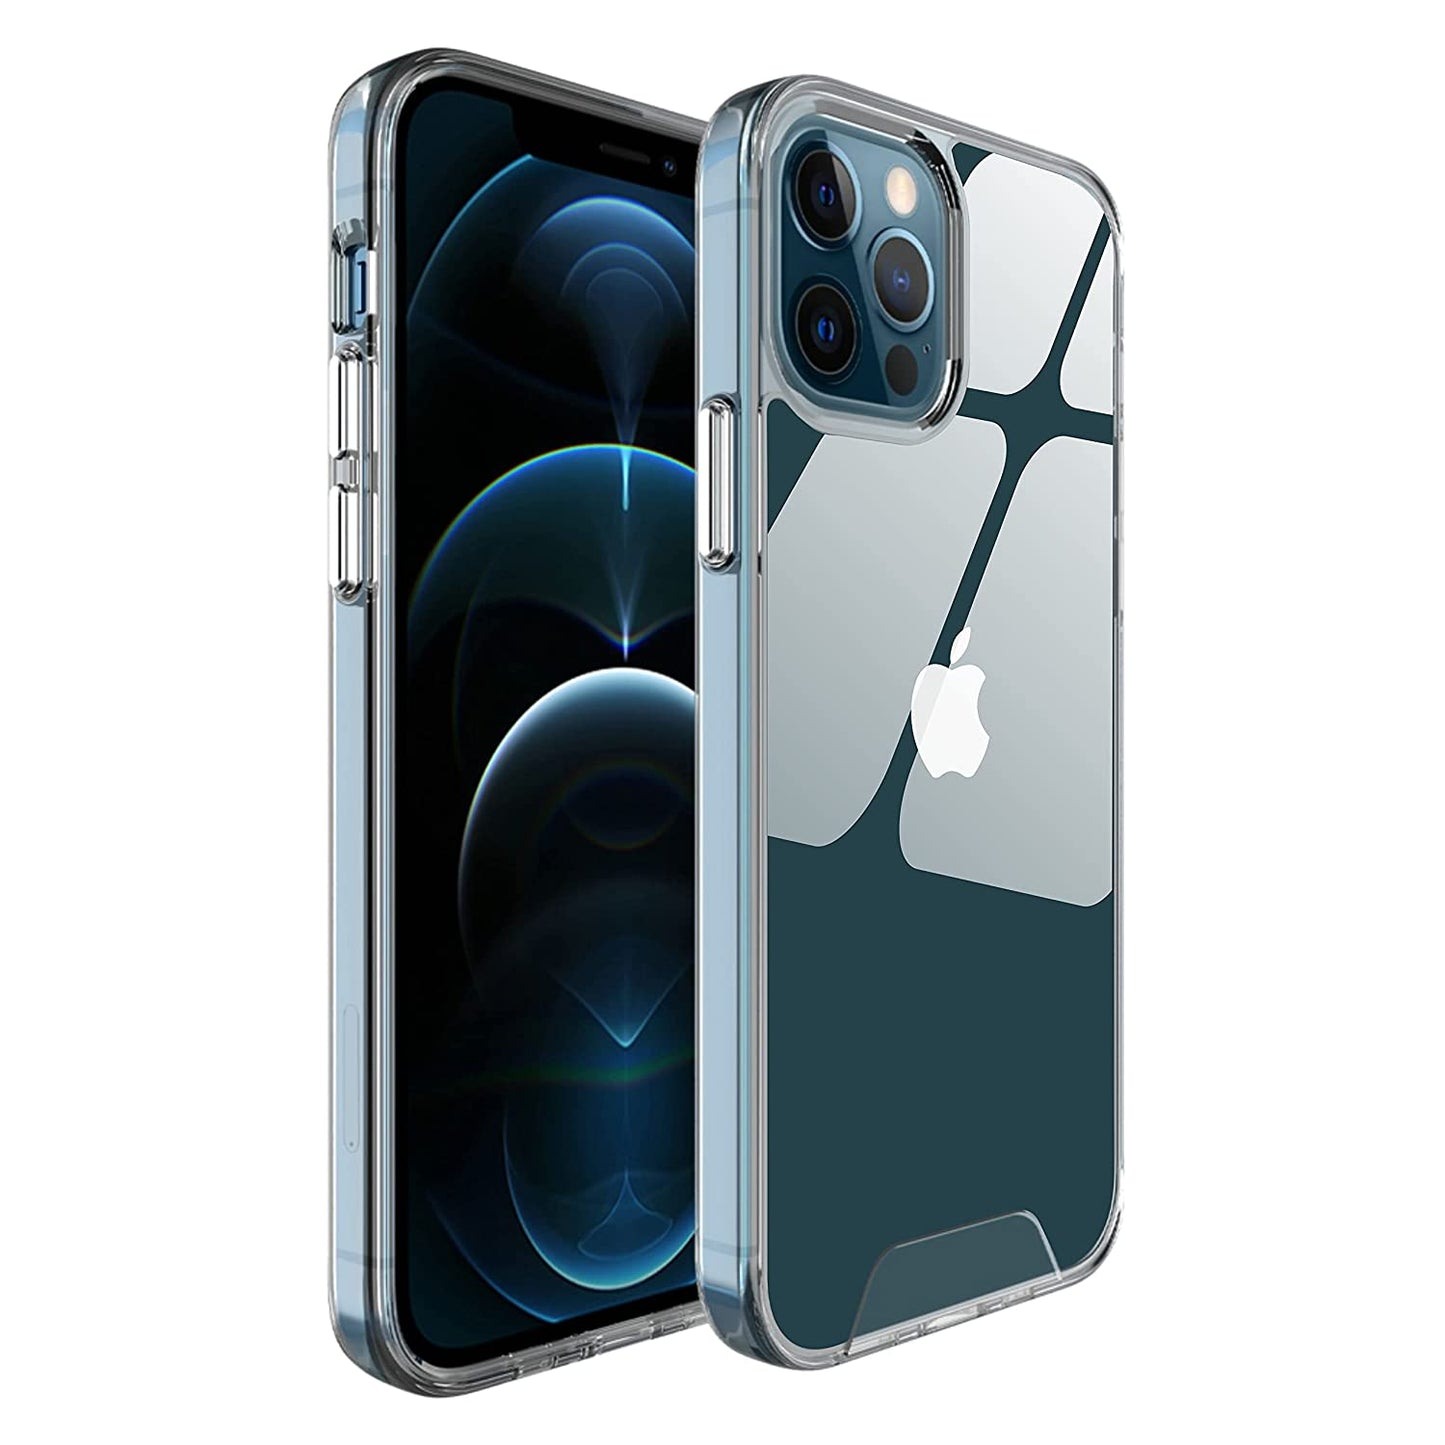 Apple Iphone 12 Pro Max Back Cover Acrylic